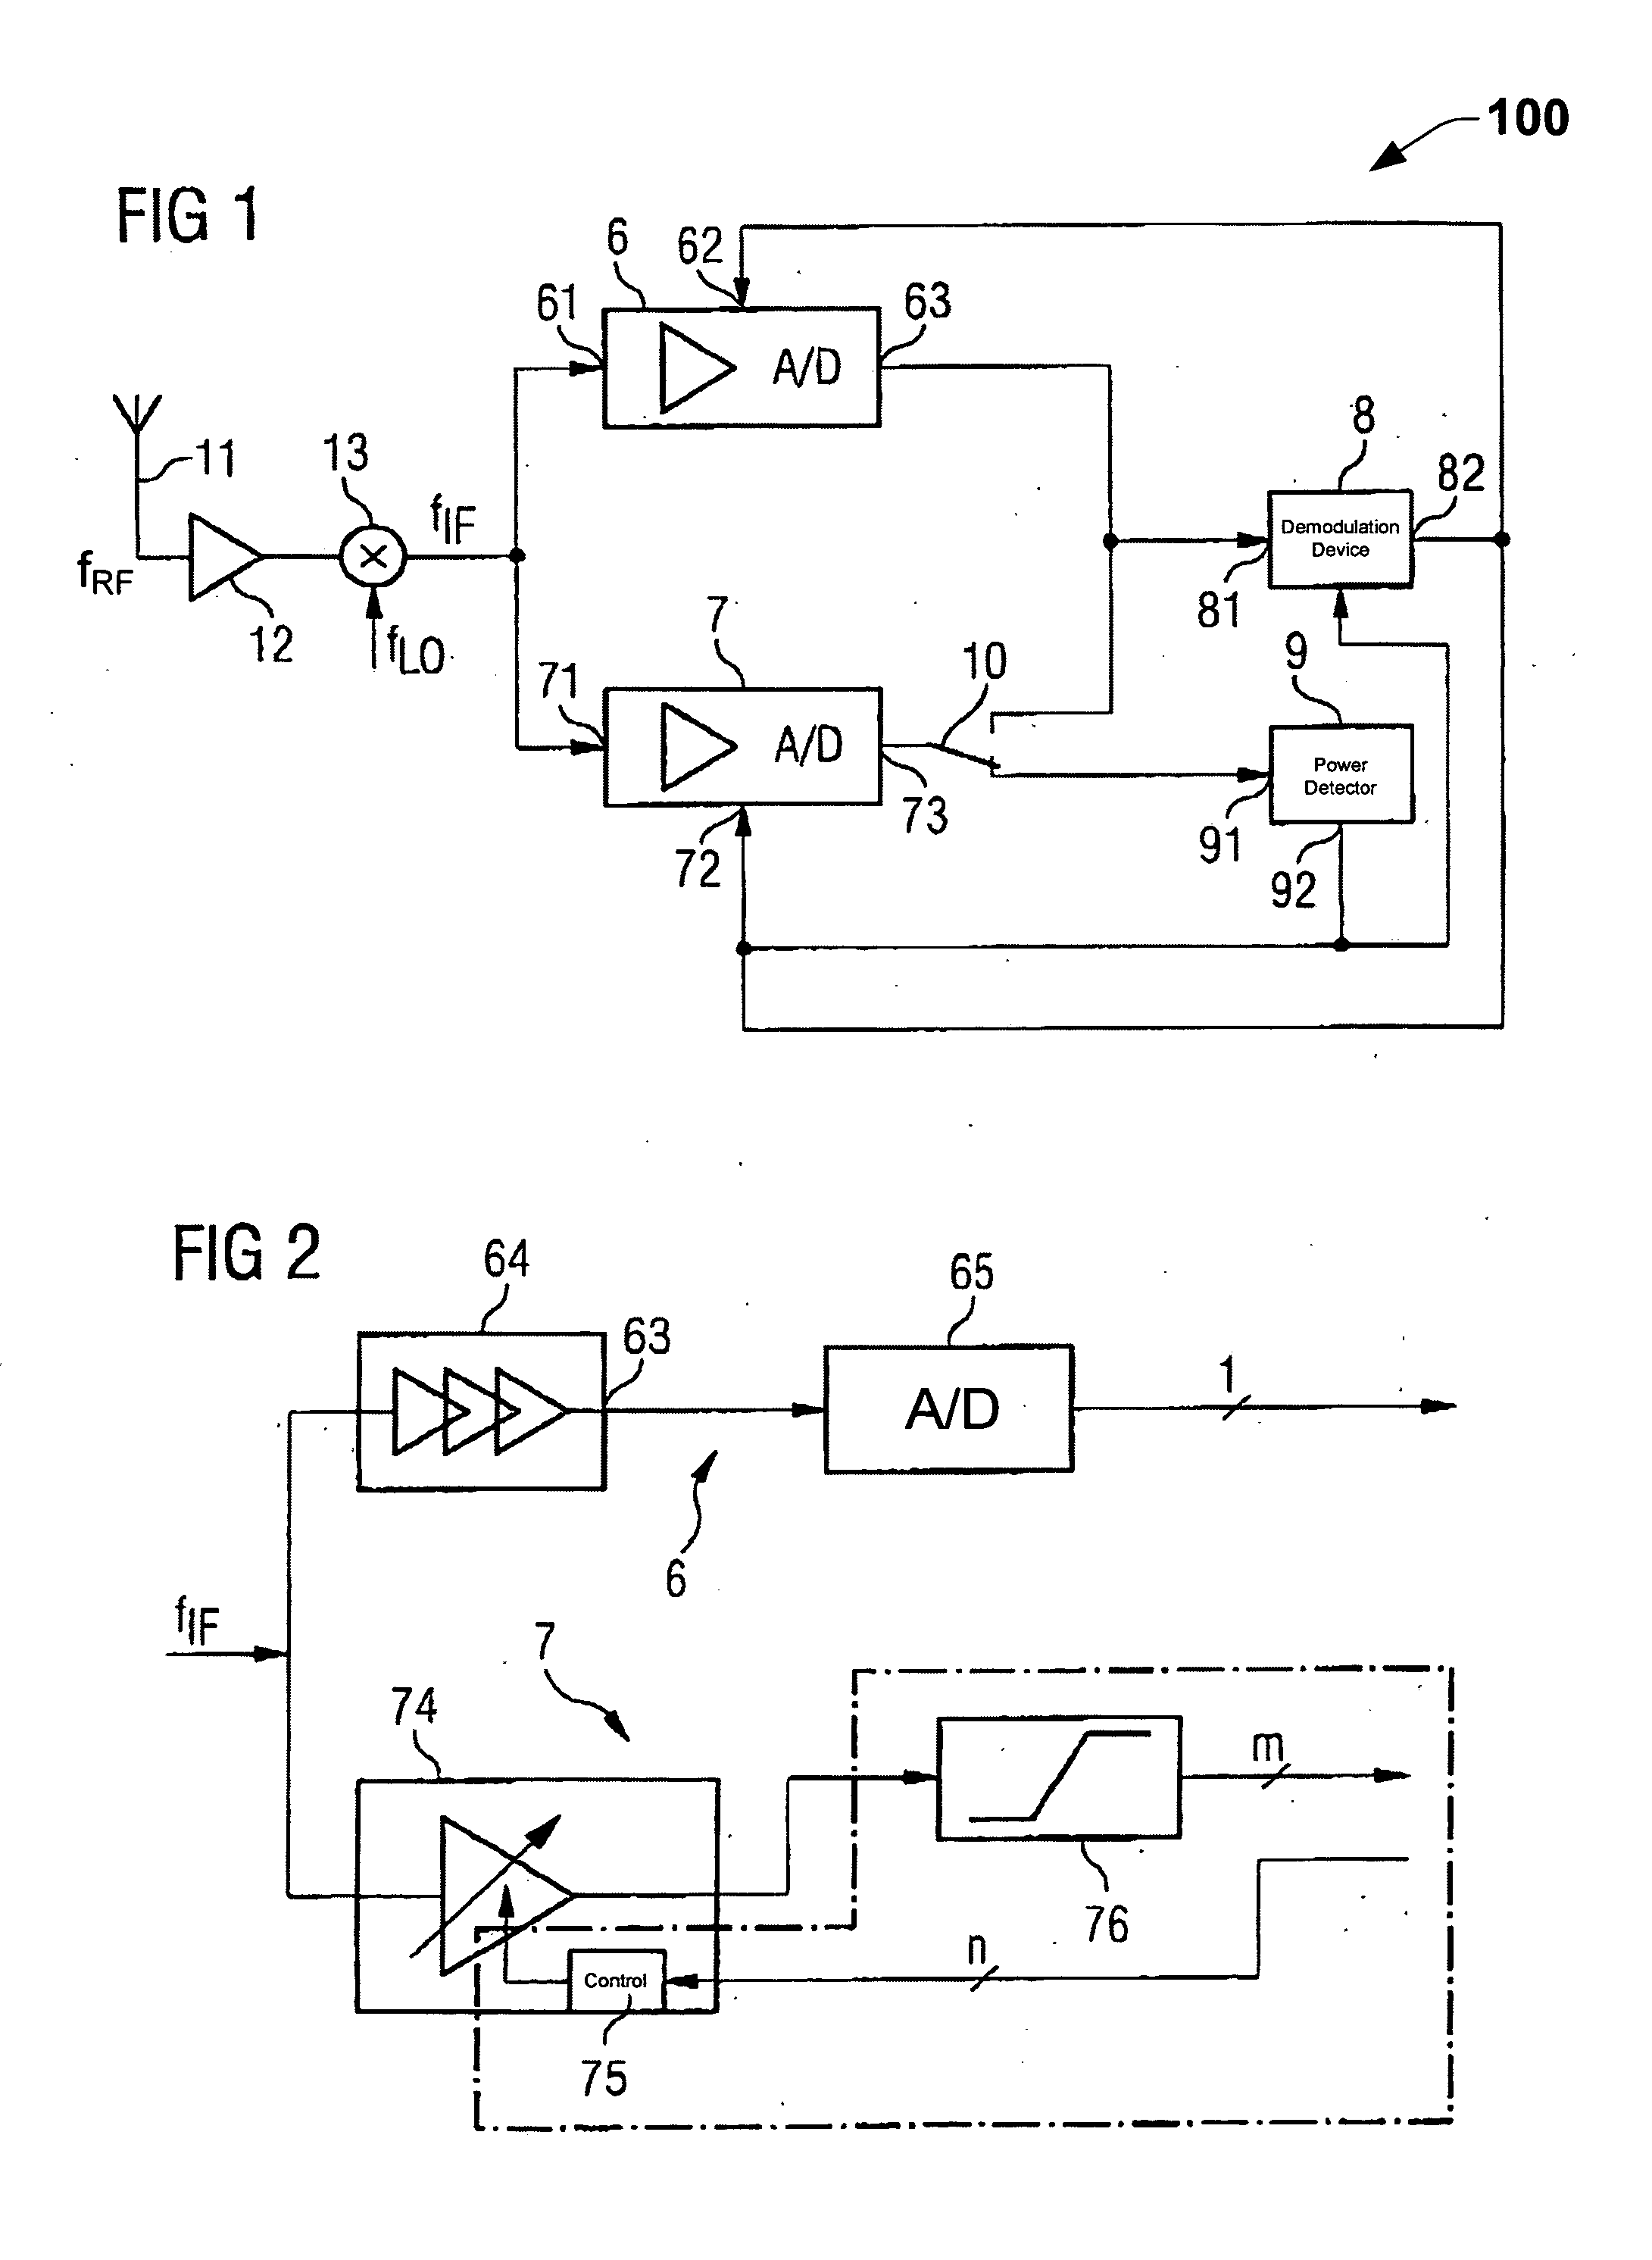 Signal processing method, particularly in a radio-frequency receiver, and signal conditioning circuit